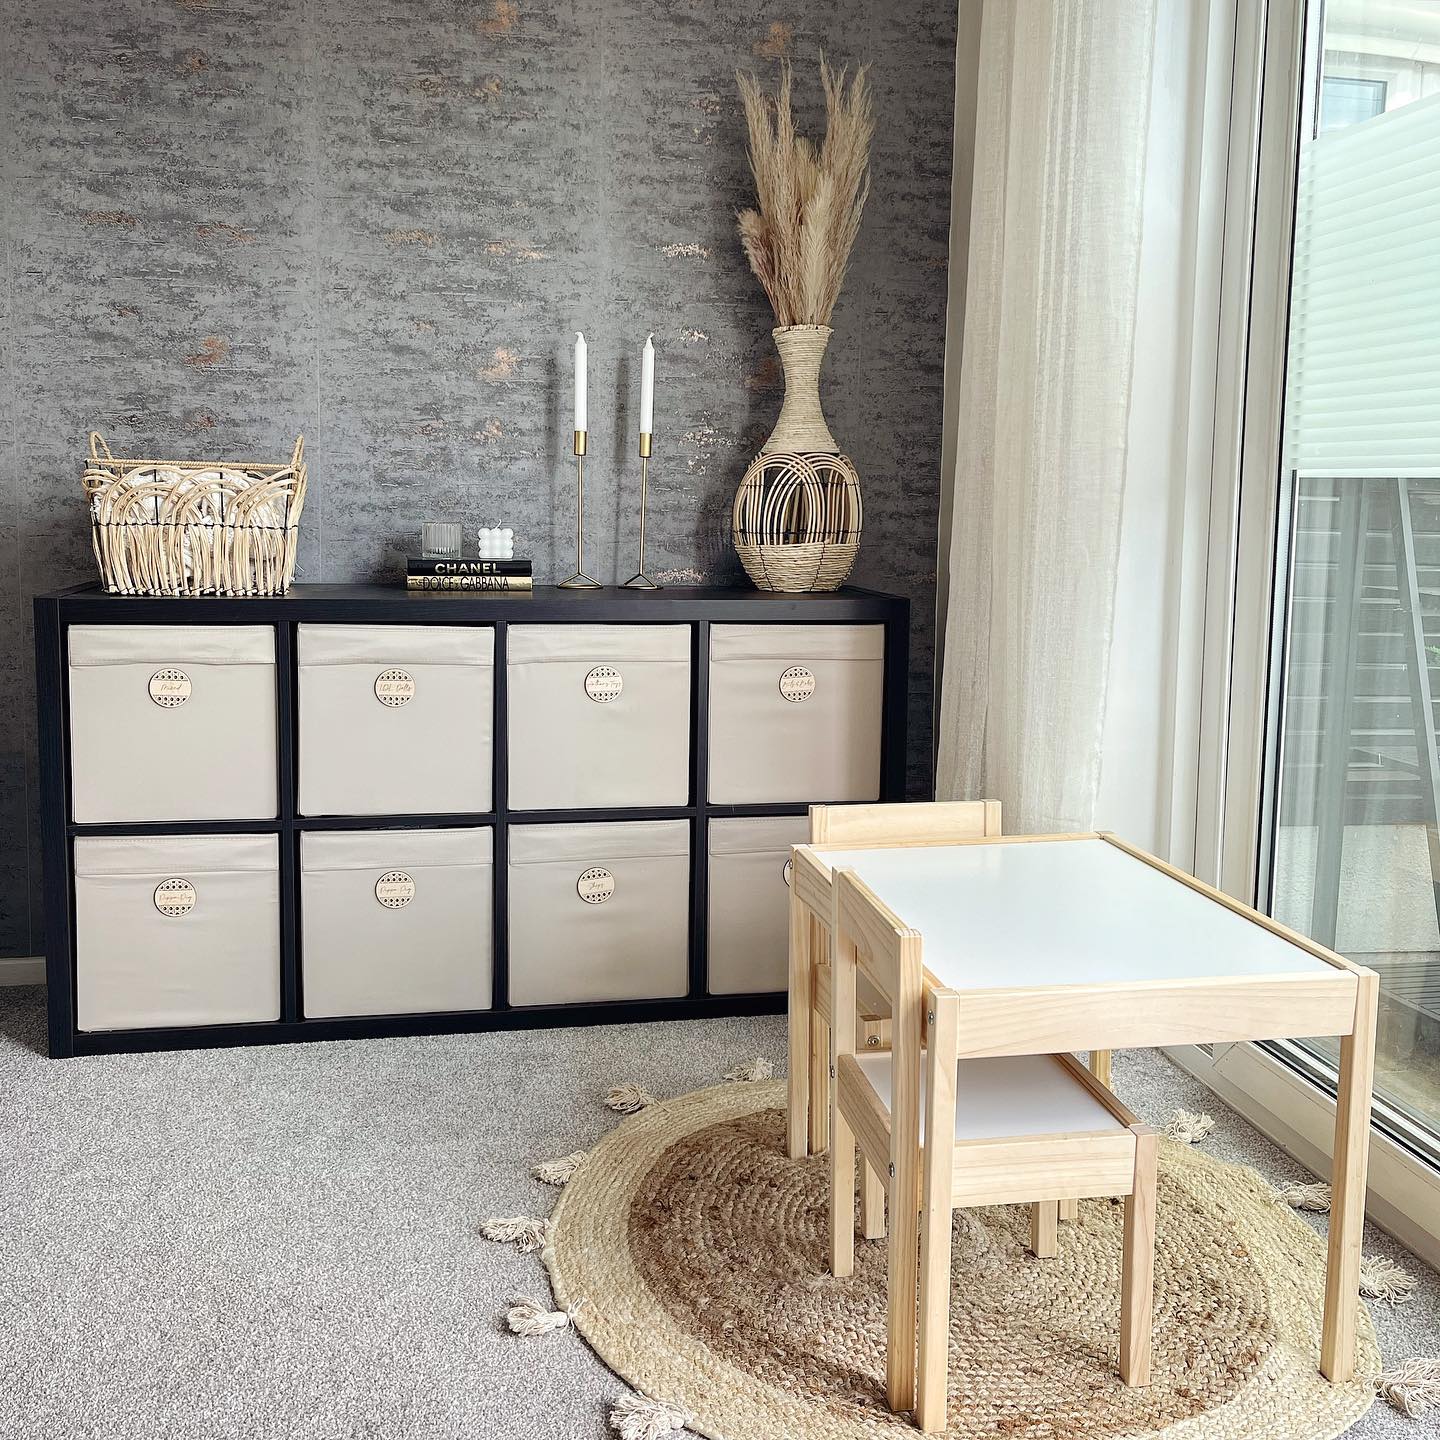 Small light wood table set with dark wood storage set and neutral storage bins. Photo by Instagram user @hannahs.home.styling.